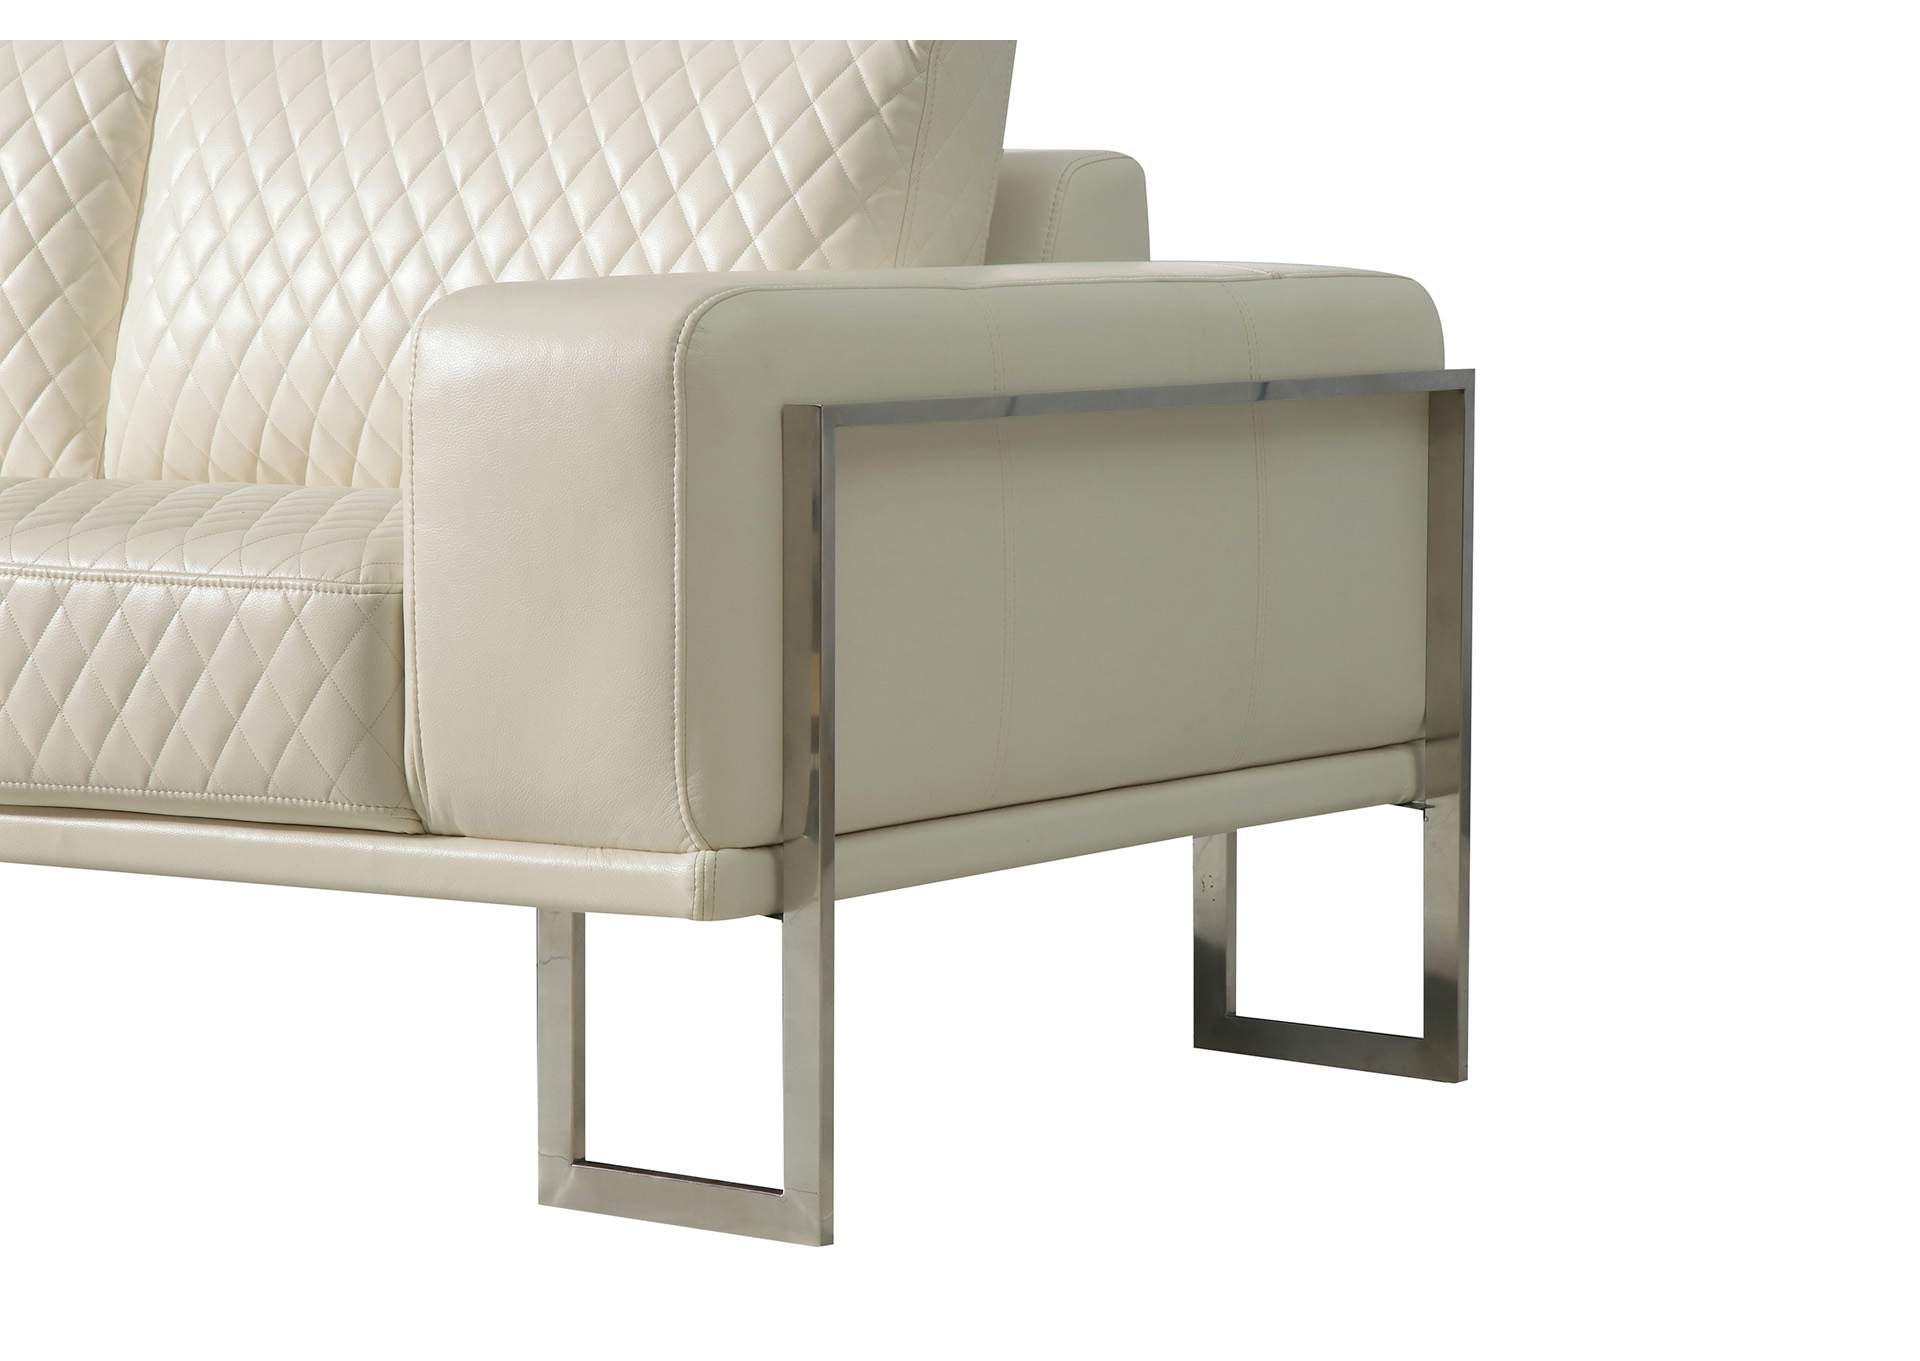 Quilted White Sofa,Global Furniture USA